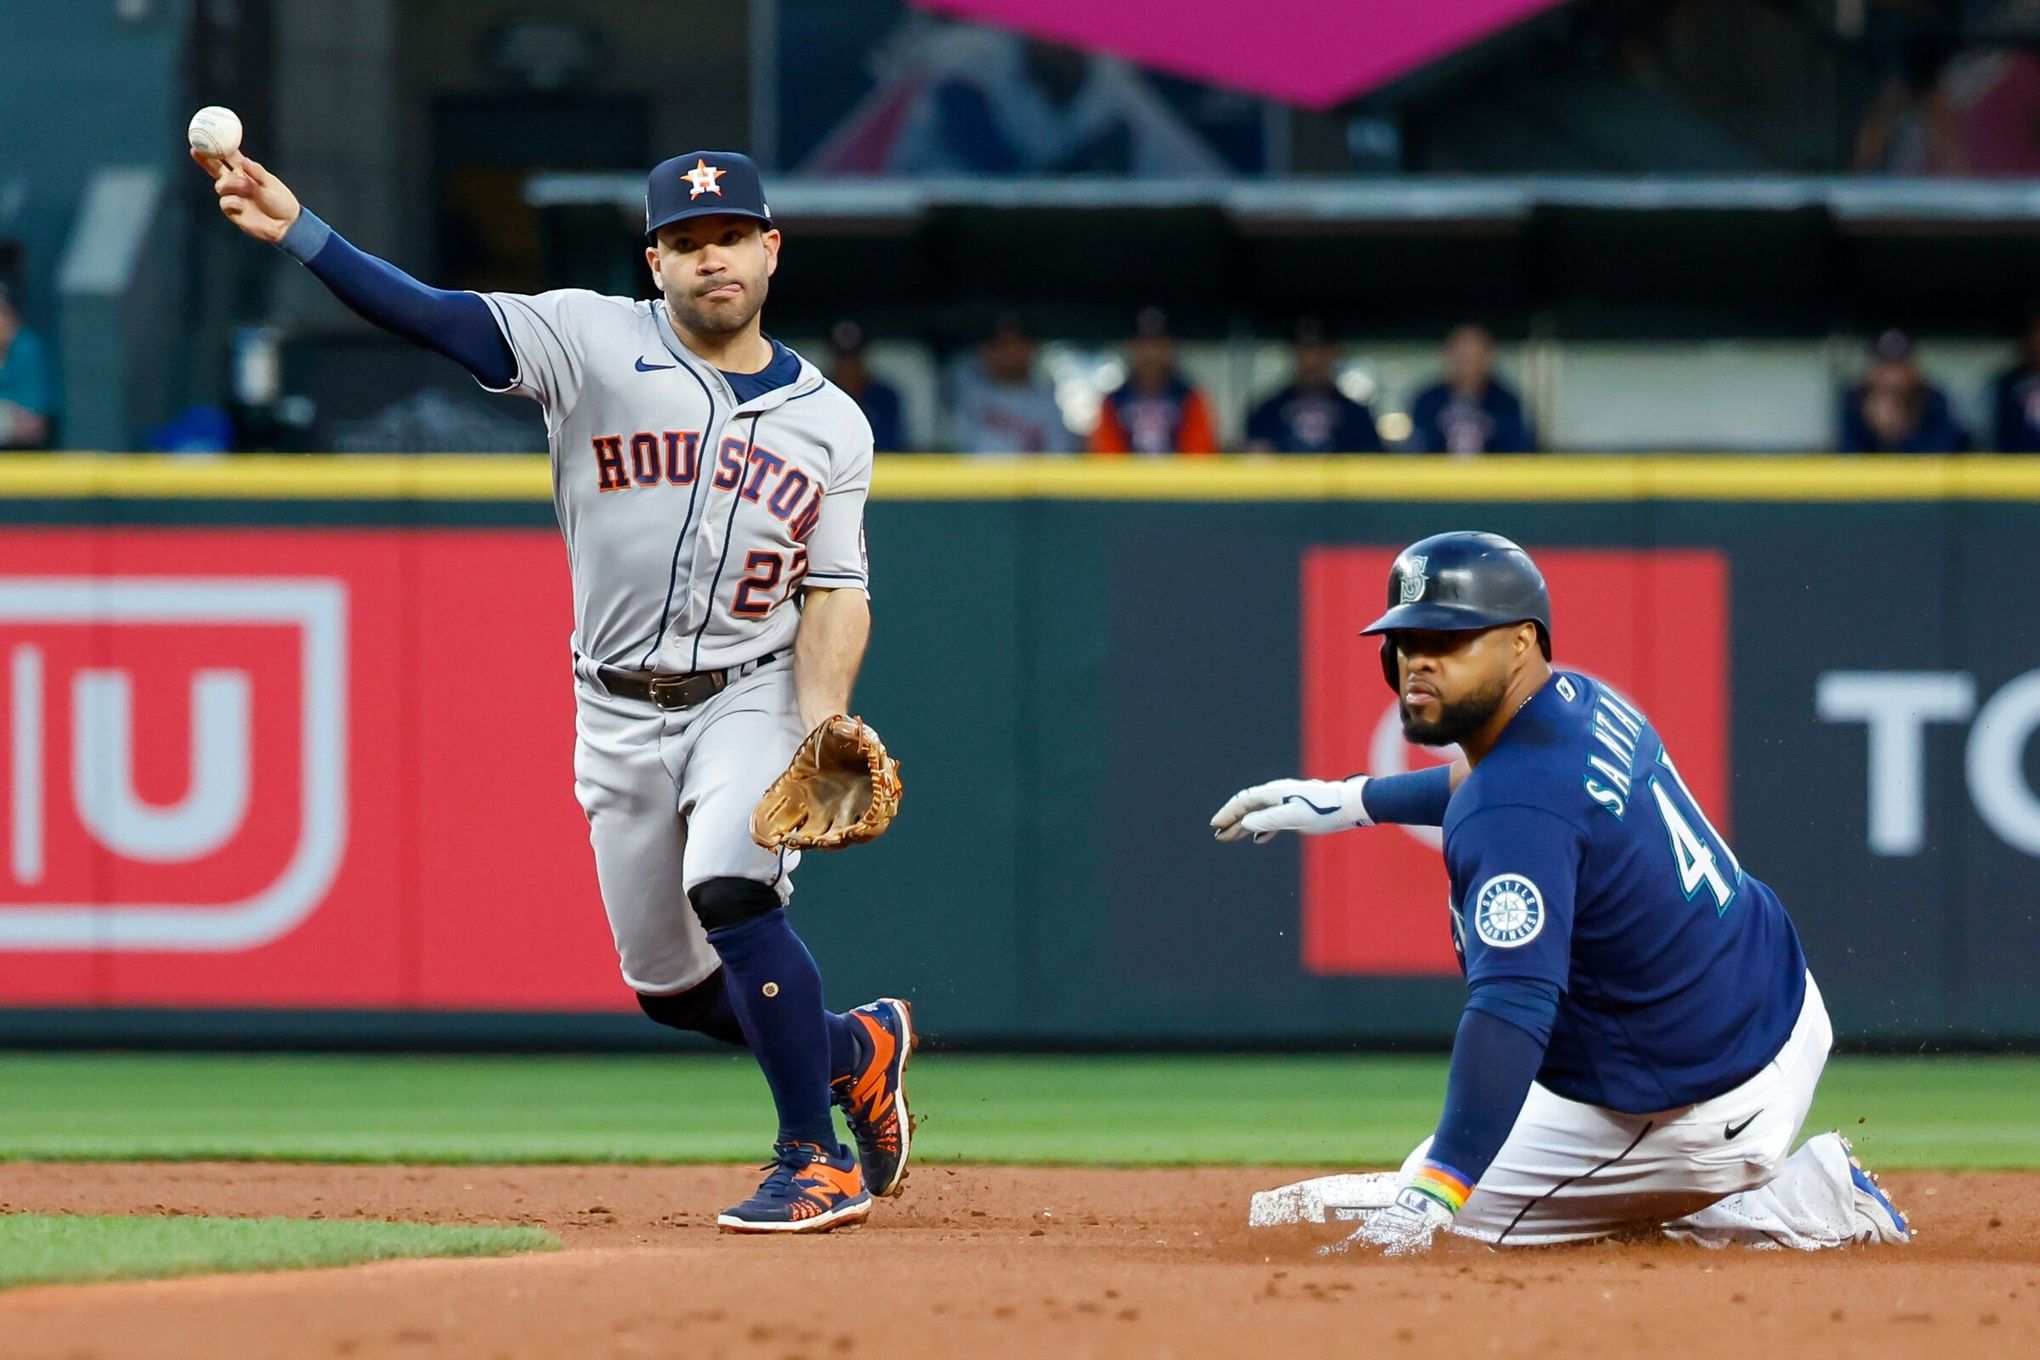 Jose Altuve Tries to Make His Teammates the Heroes, But The Most